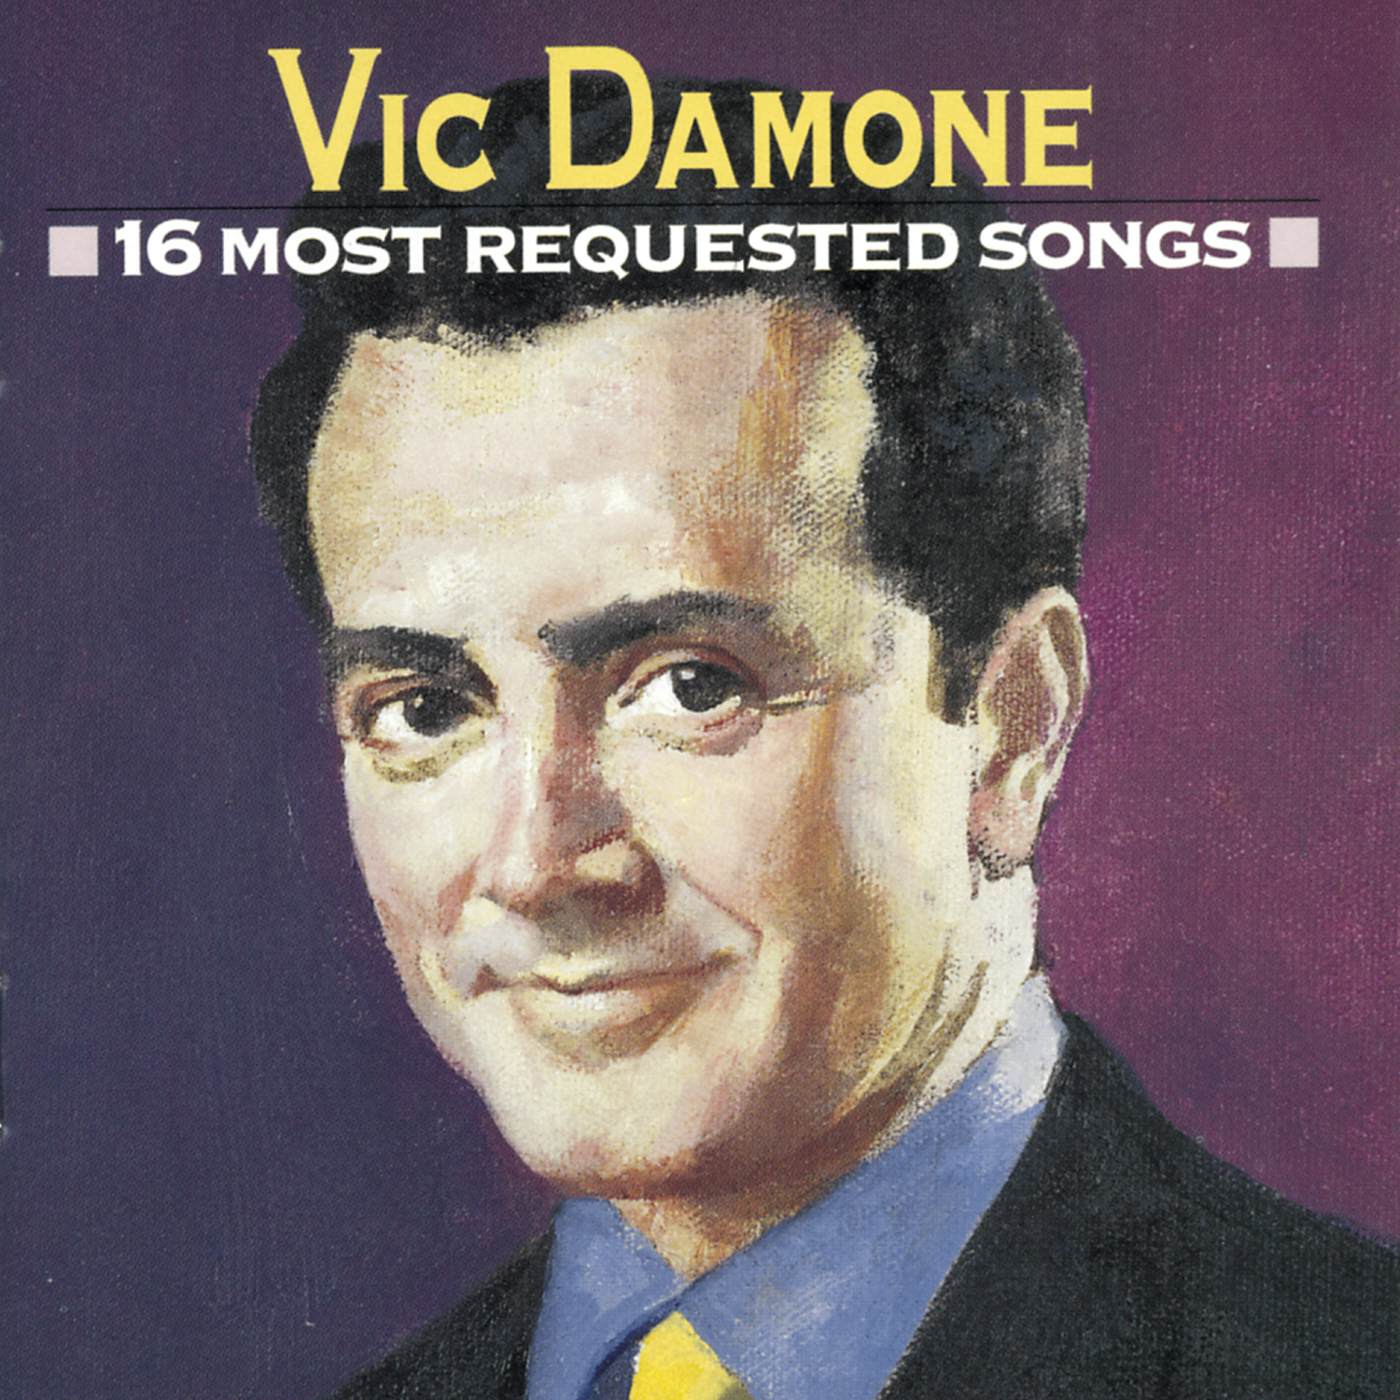 Vic Damone 16 MOST REQUESTED SONGS CD